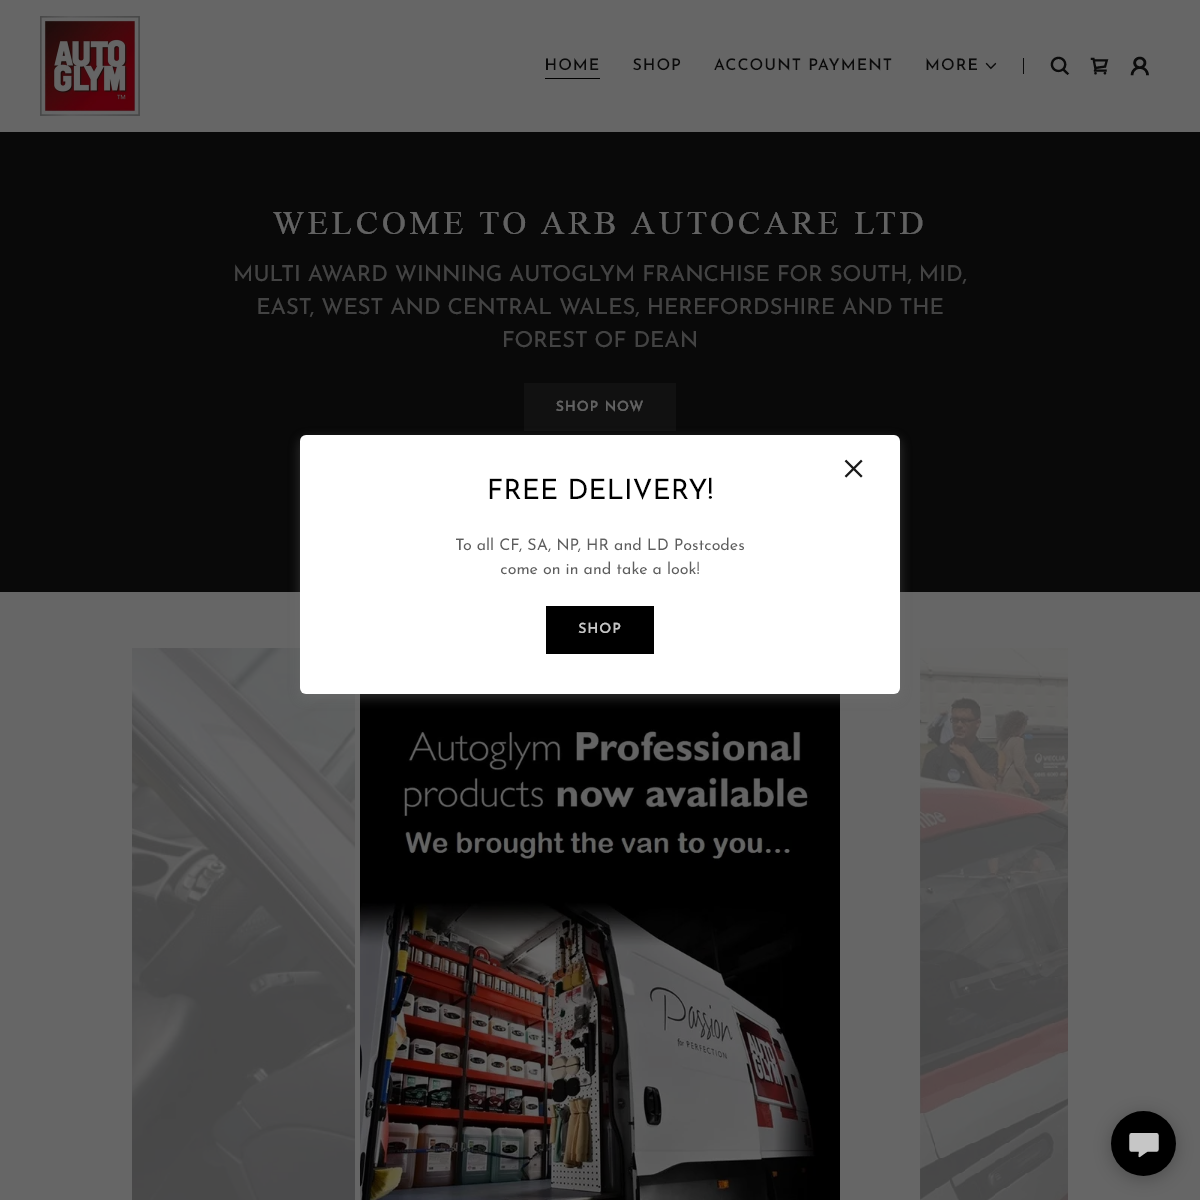 A complete backup of arbautocare.co.uk